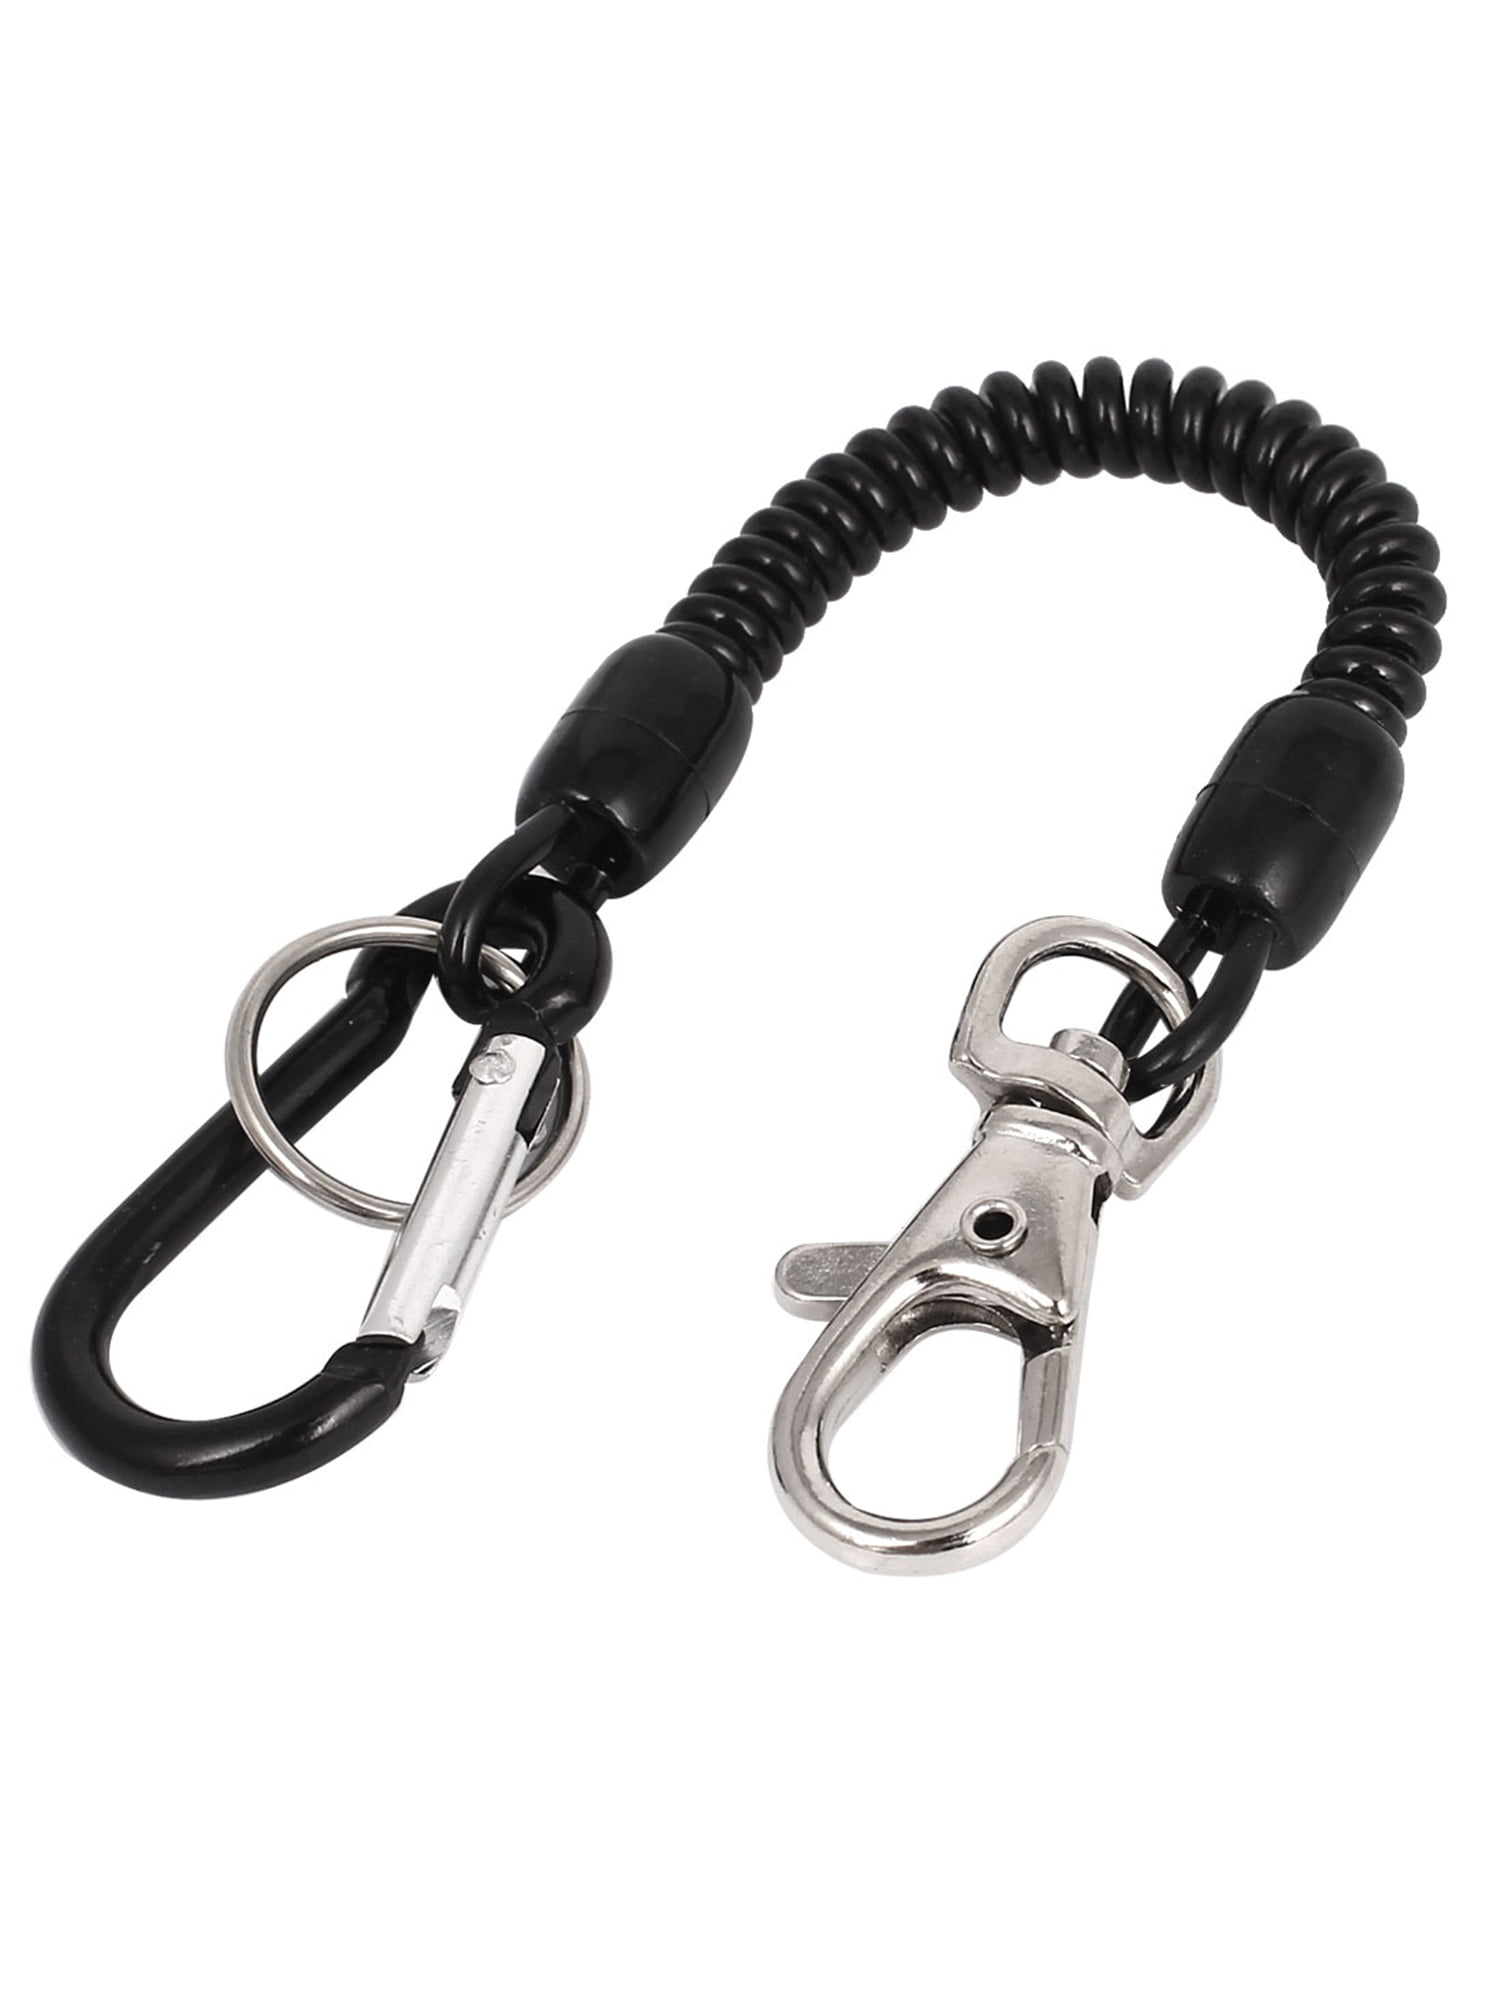 Stainless Steel Key Chain Clip Hook Buckle Keychain Climbing Ring Carabiner L5Y1 